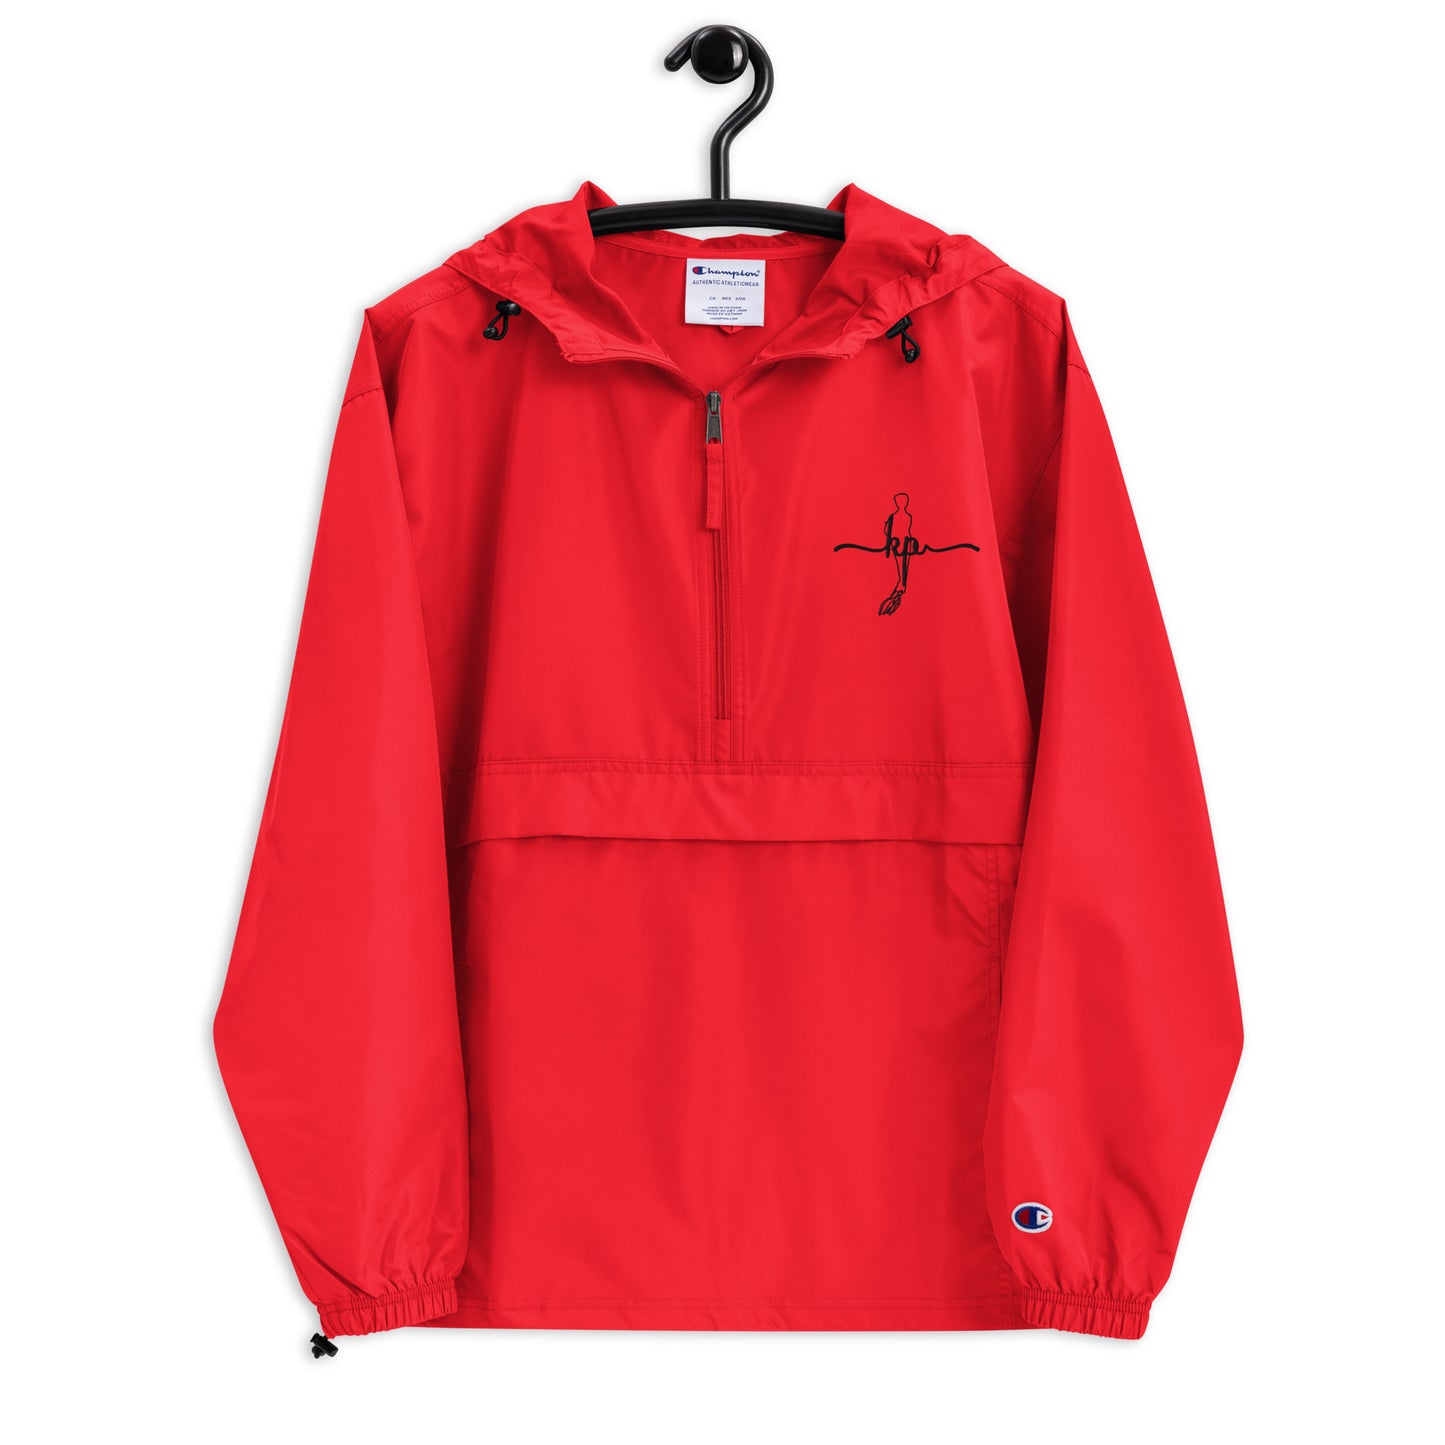 .Embroidered Champion Packable Jacket